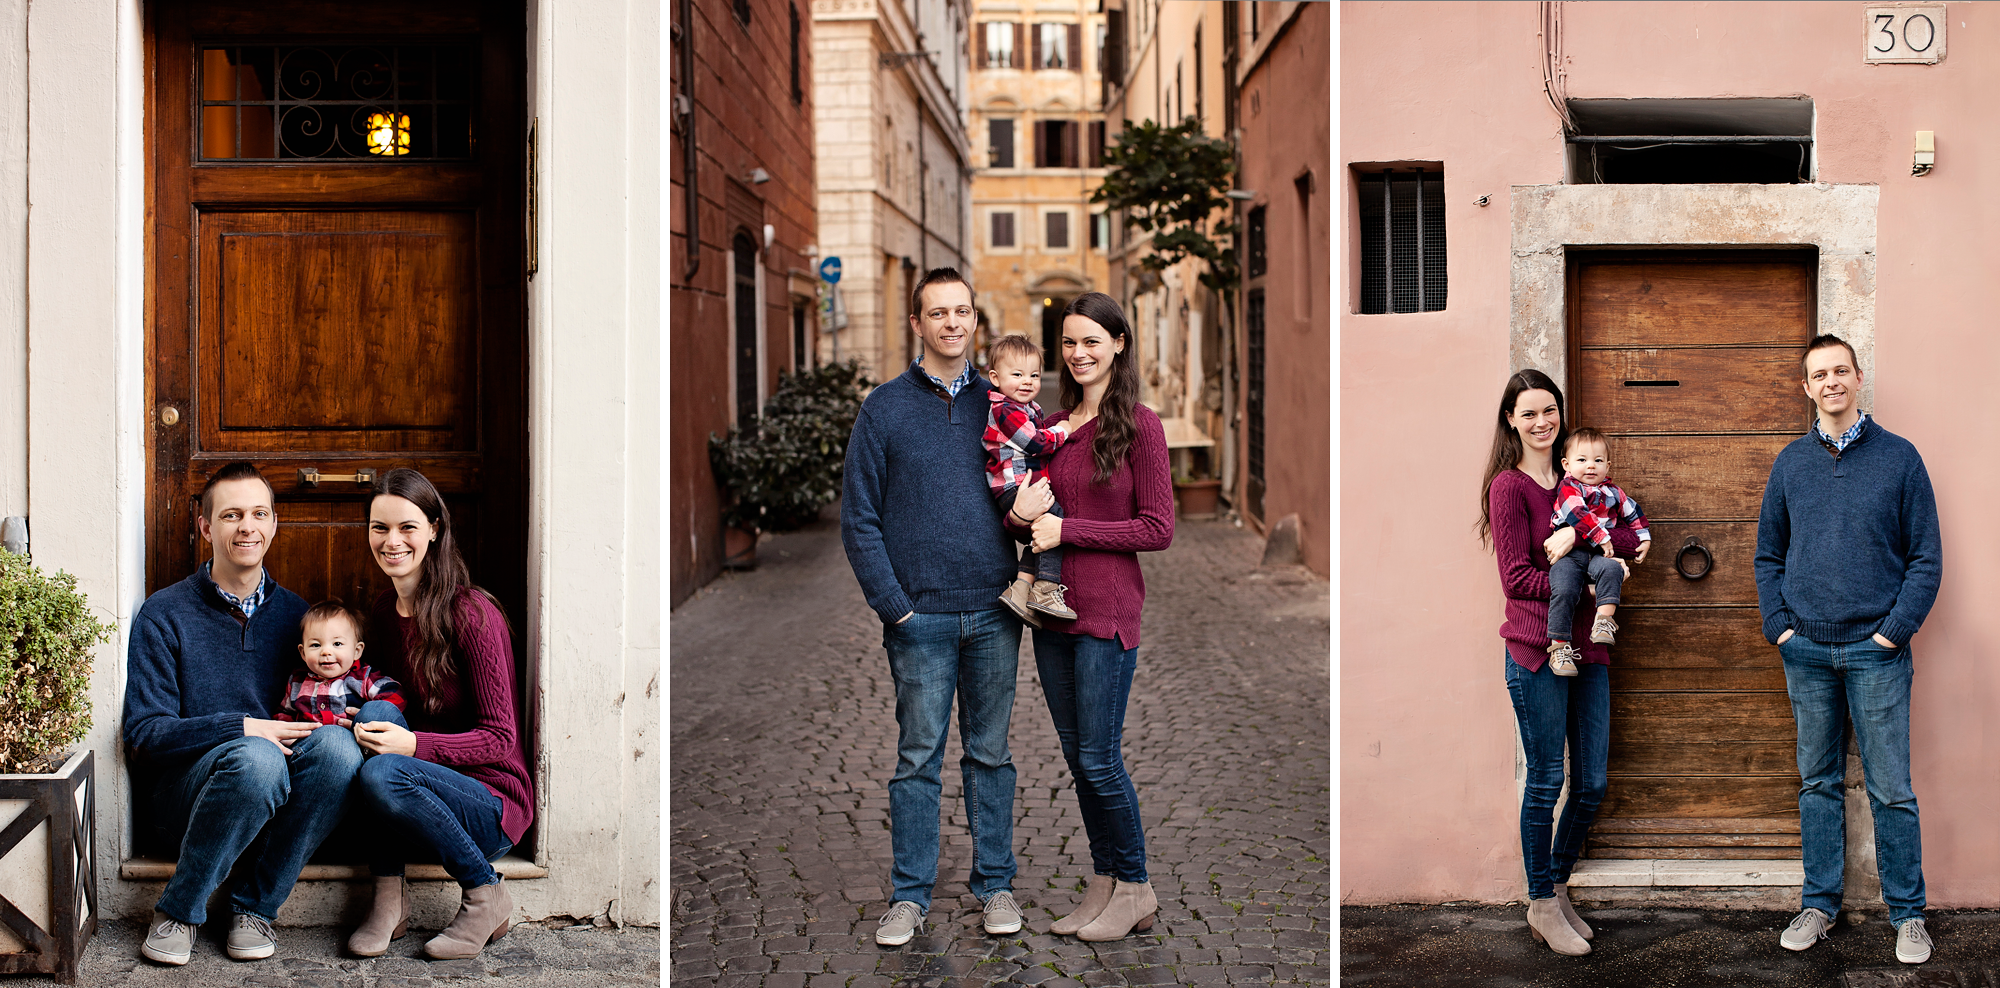 Honeymoon, vacation, family, engagement, maternity, wedding, love story individual and solo photoshoots in Rome, Italy by photographer Tricia Anne Photography | Rome Photographer, vacation, tripadvisor, instagram, fun, married, bride, groom, love, story, photography, session, photoshoot, wedding photographer, mywed, vacation photographer, engagement photo, honeymoon photoshoot, rome honeymoon, rome wedding, elopement in Rome, honeymoon photographer rome, Family Photo shoot Rome, Rome Family Photography, Rome Family Photographer, Vatican Photo shoot, Vatican Photography, Castle Sant’angelo photo shoot, Rome doors